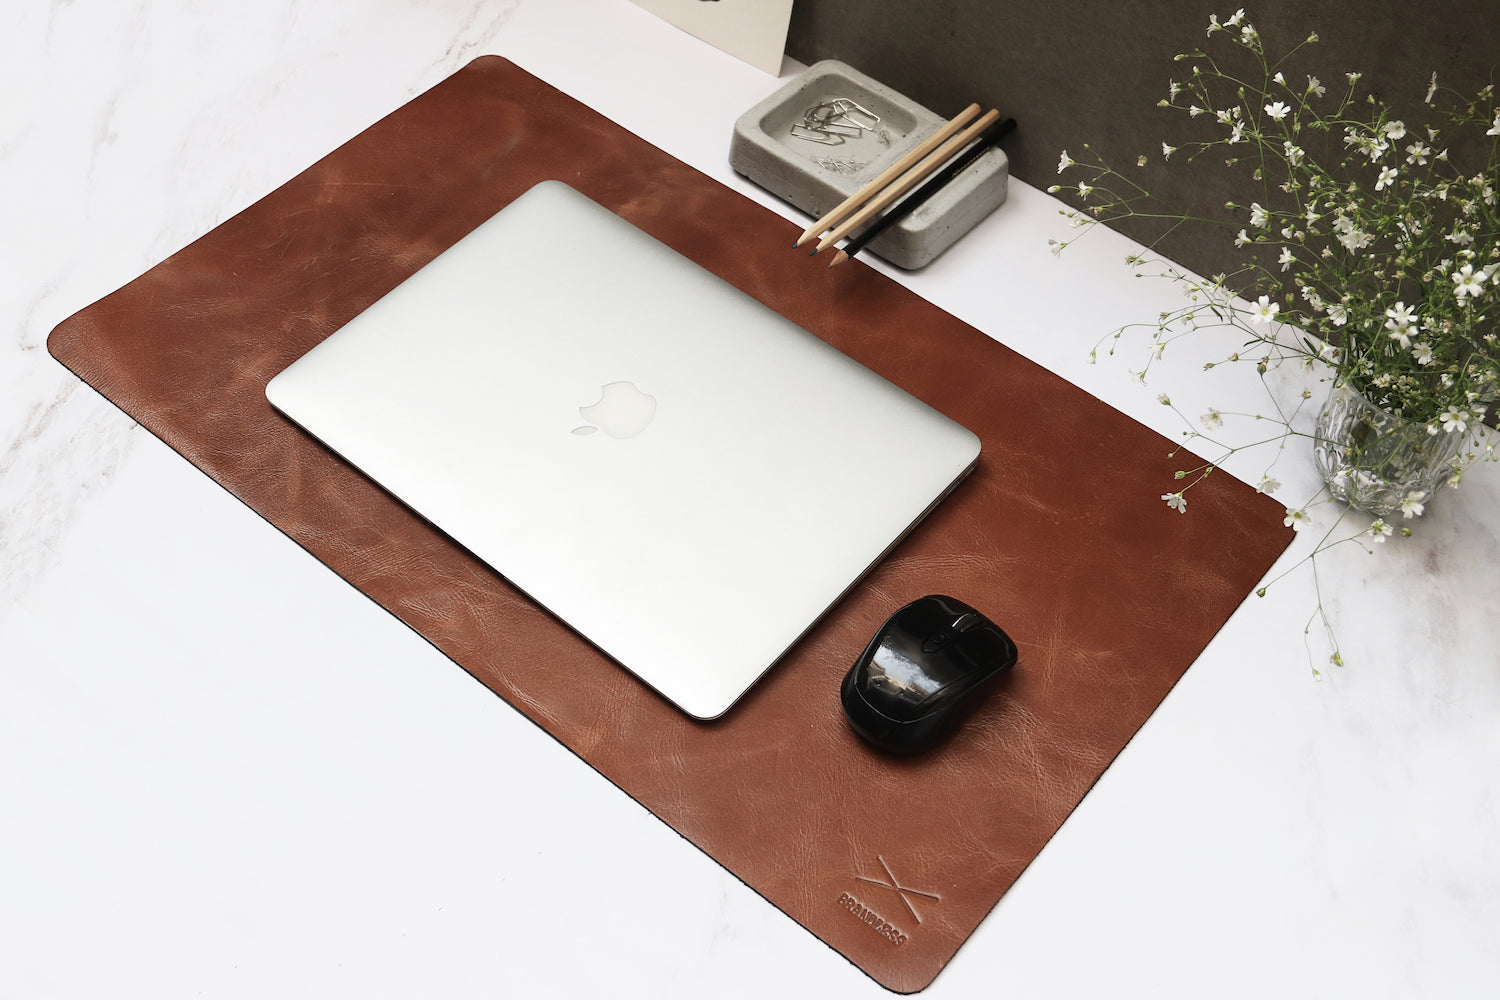 HOME ACCESSORIES OFFICE DESK ACCESSORIES LEATHER GOODS DESK BLOTTER MAT HANDCRAFTED Made in India